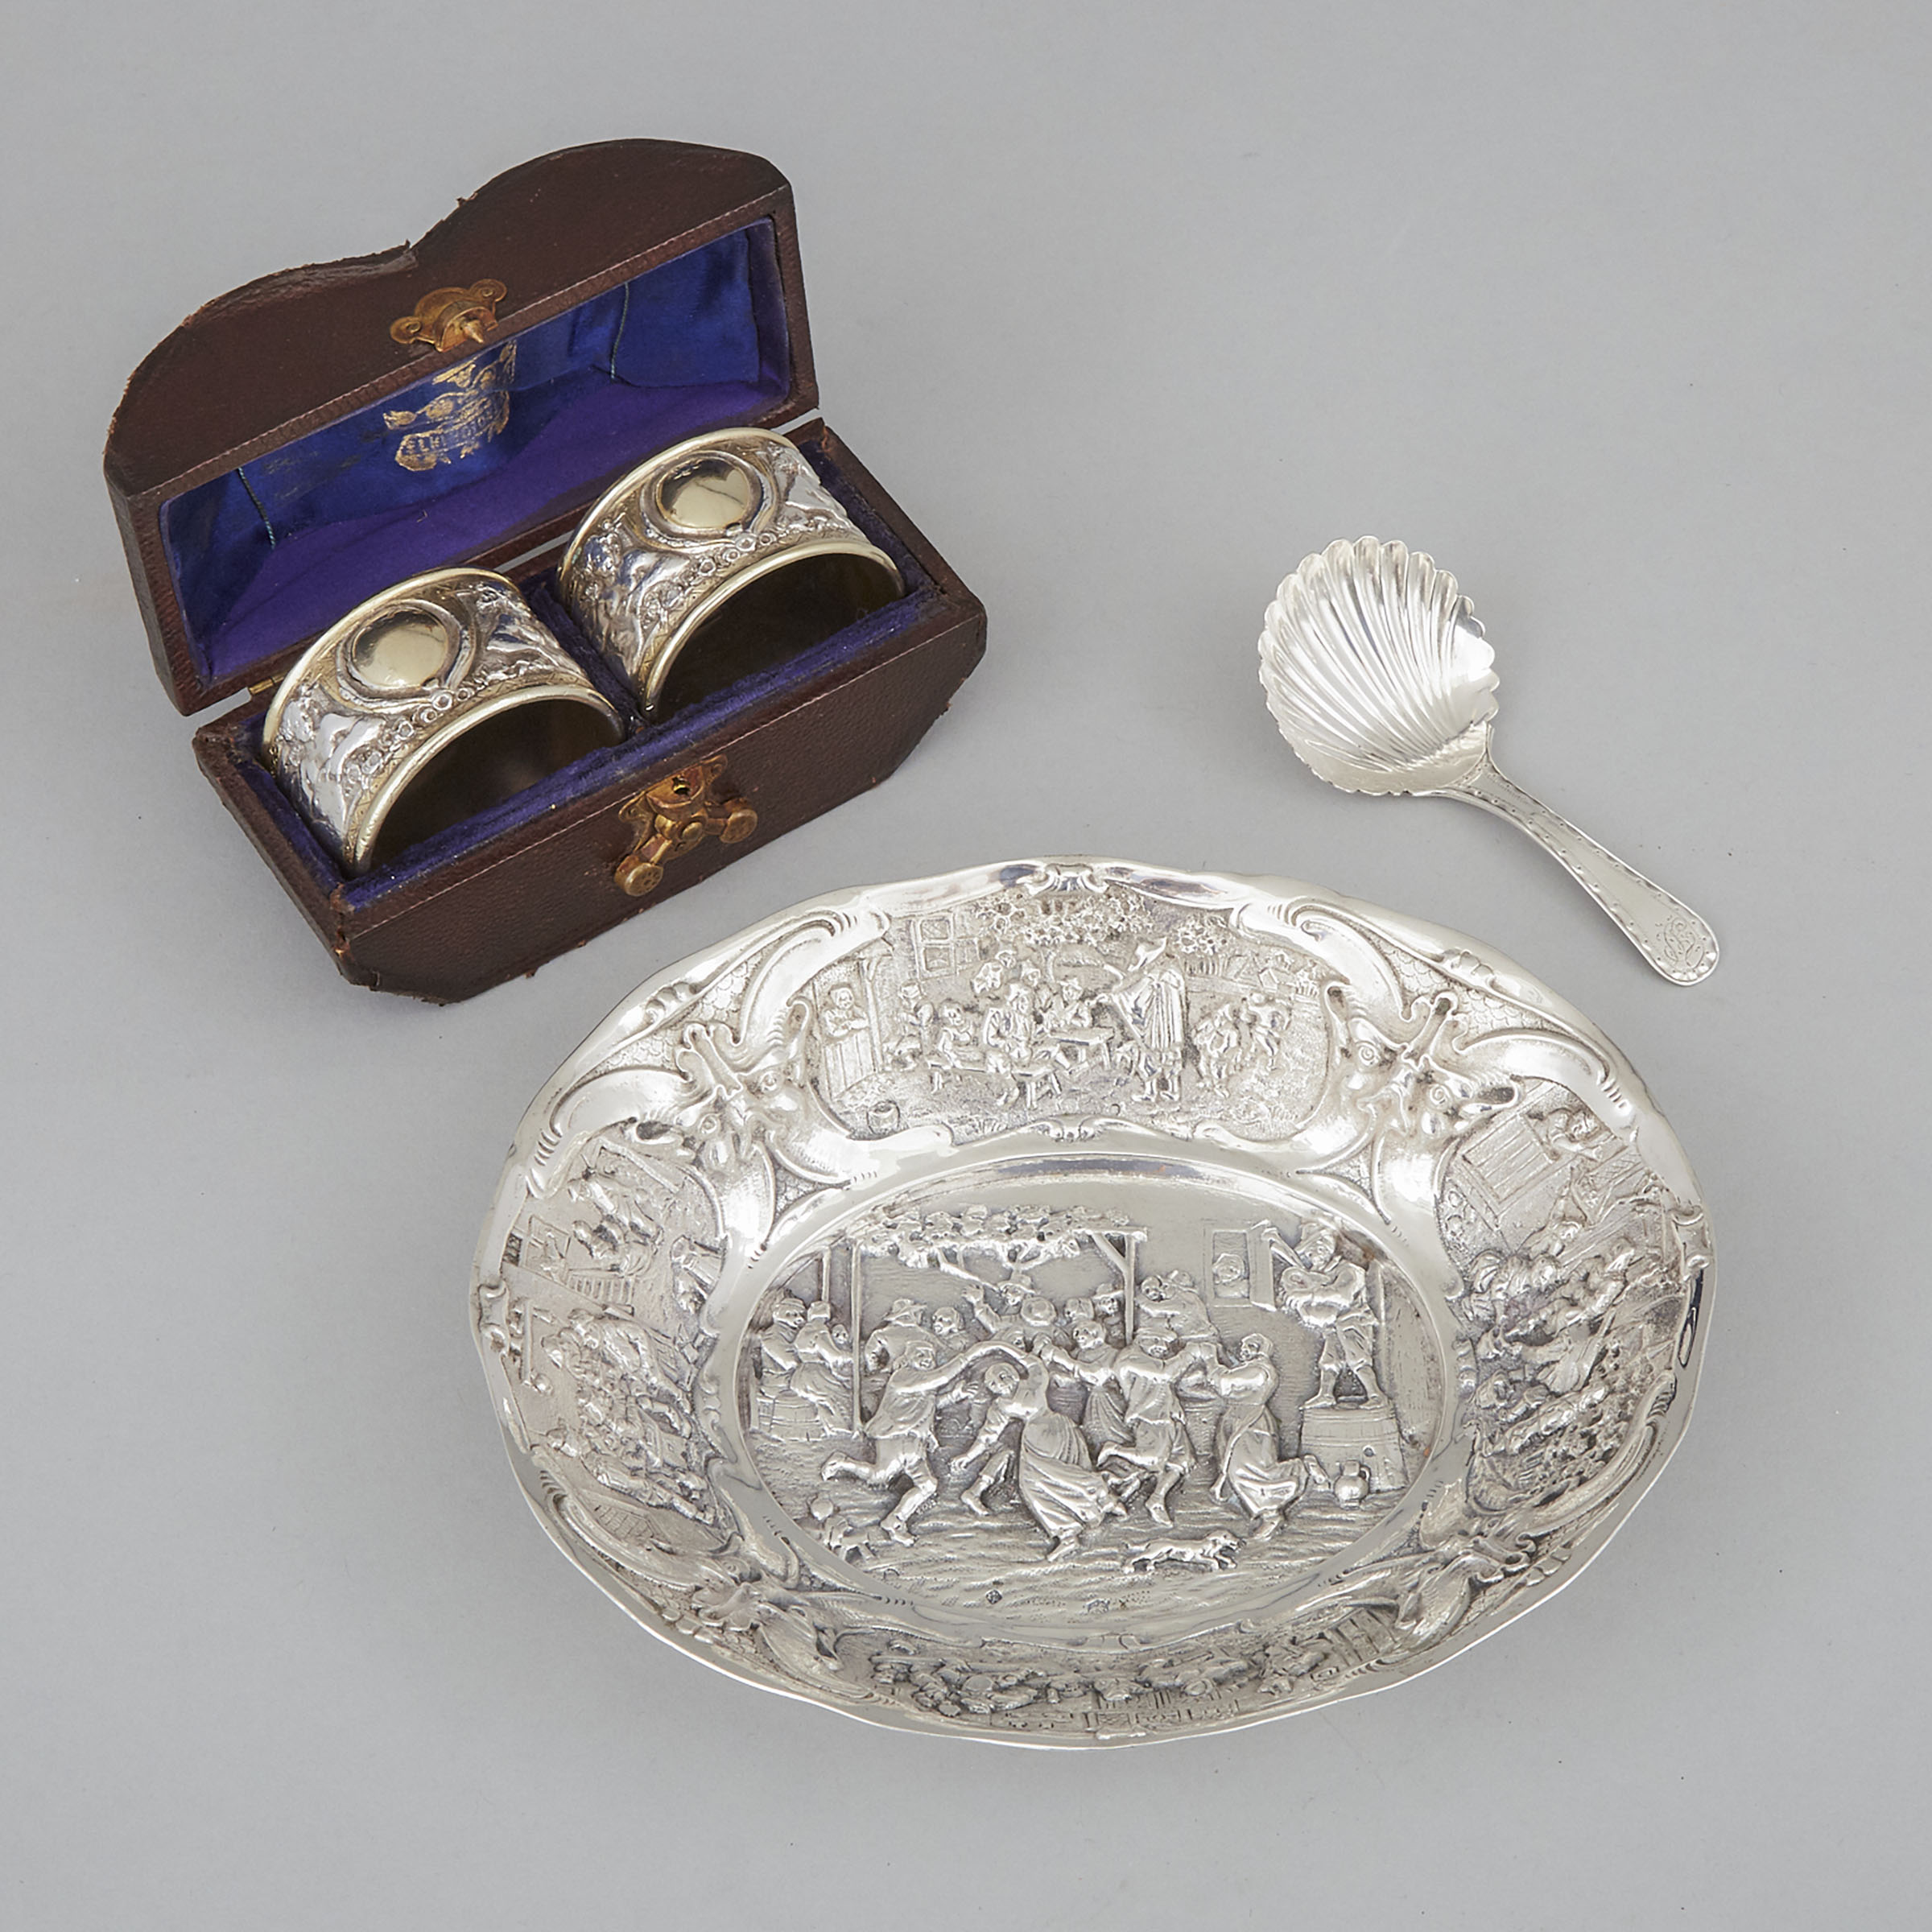 George III Silver Caddy Spoon, John Emes, London, c.1800, Later Dutch Silver Oval Dish and a Cased Pair of Silver Plated Napkin Rings, Elkington & Co. late 19th century